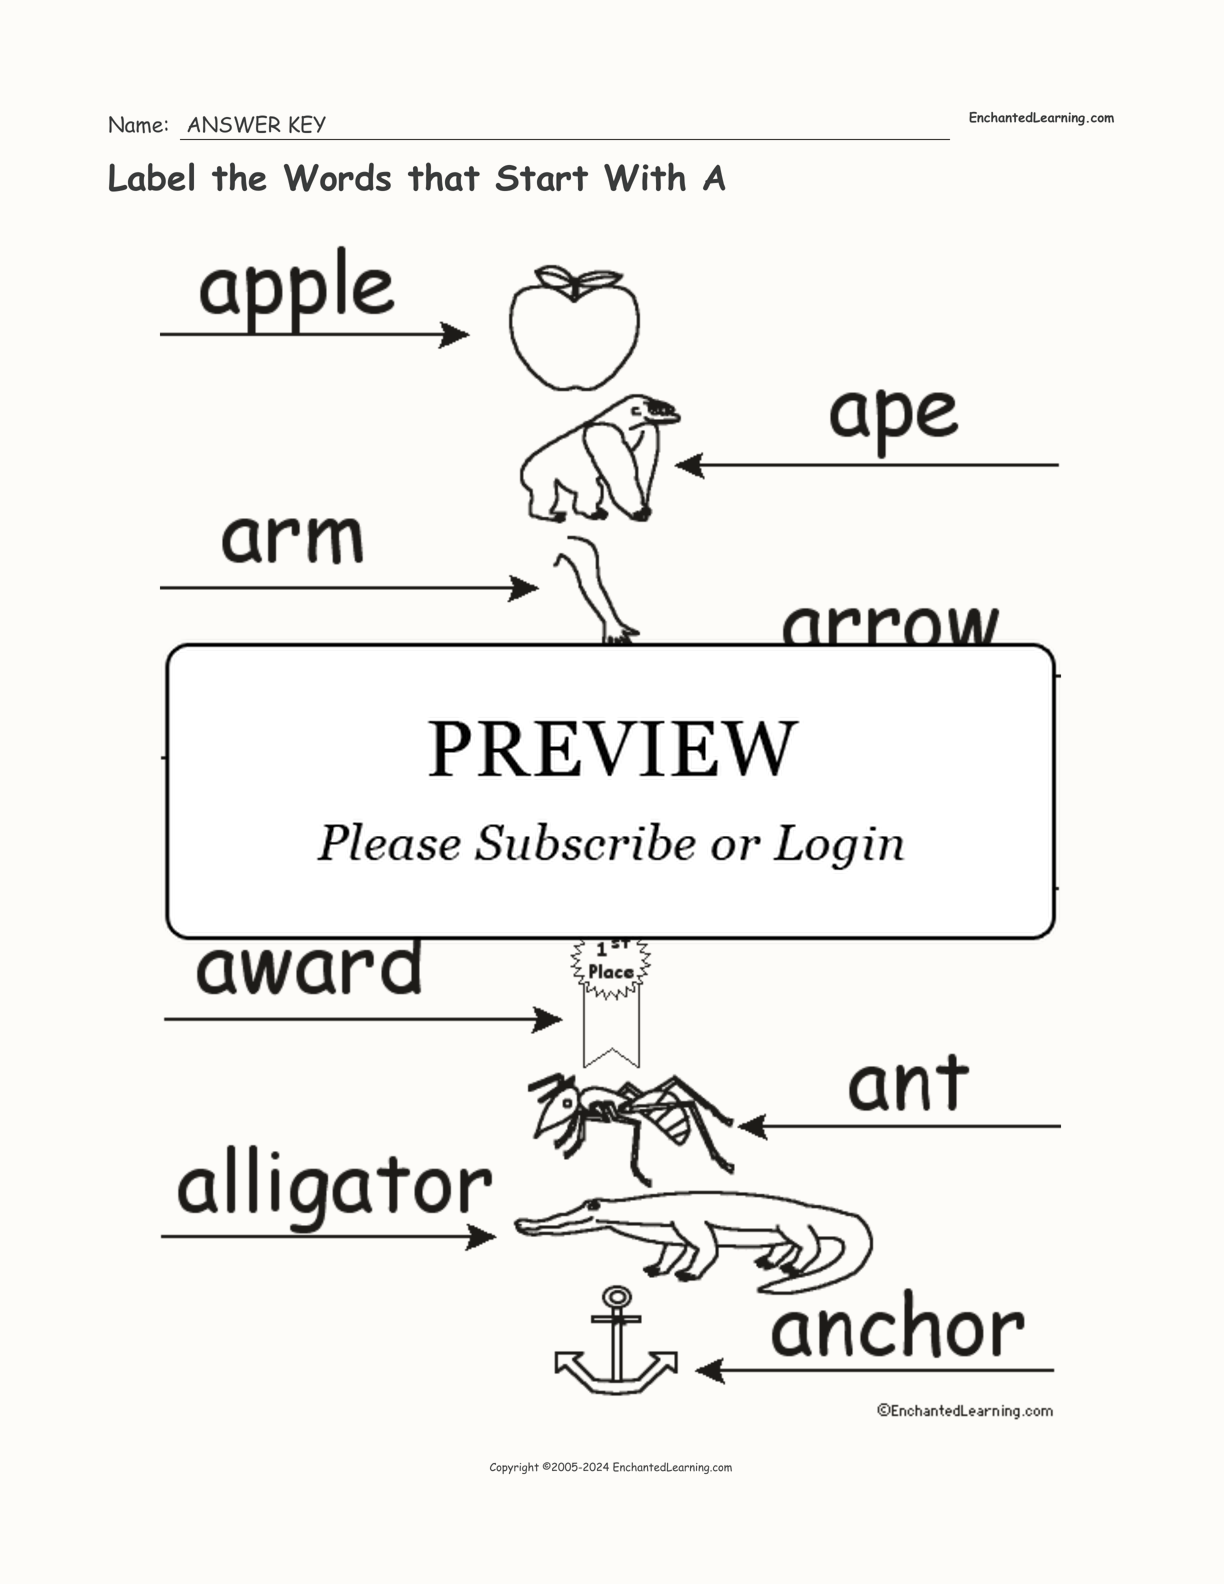 Label the Words that Start With A interactive worksheet page 2